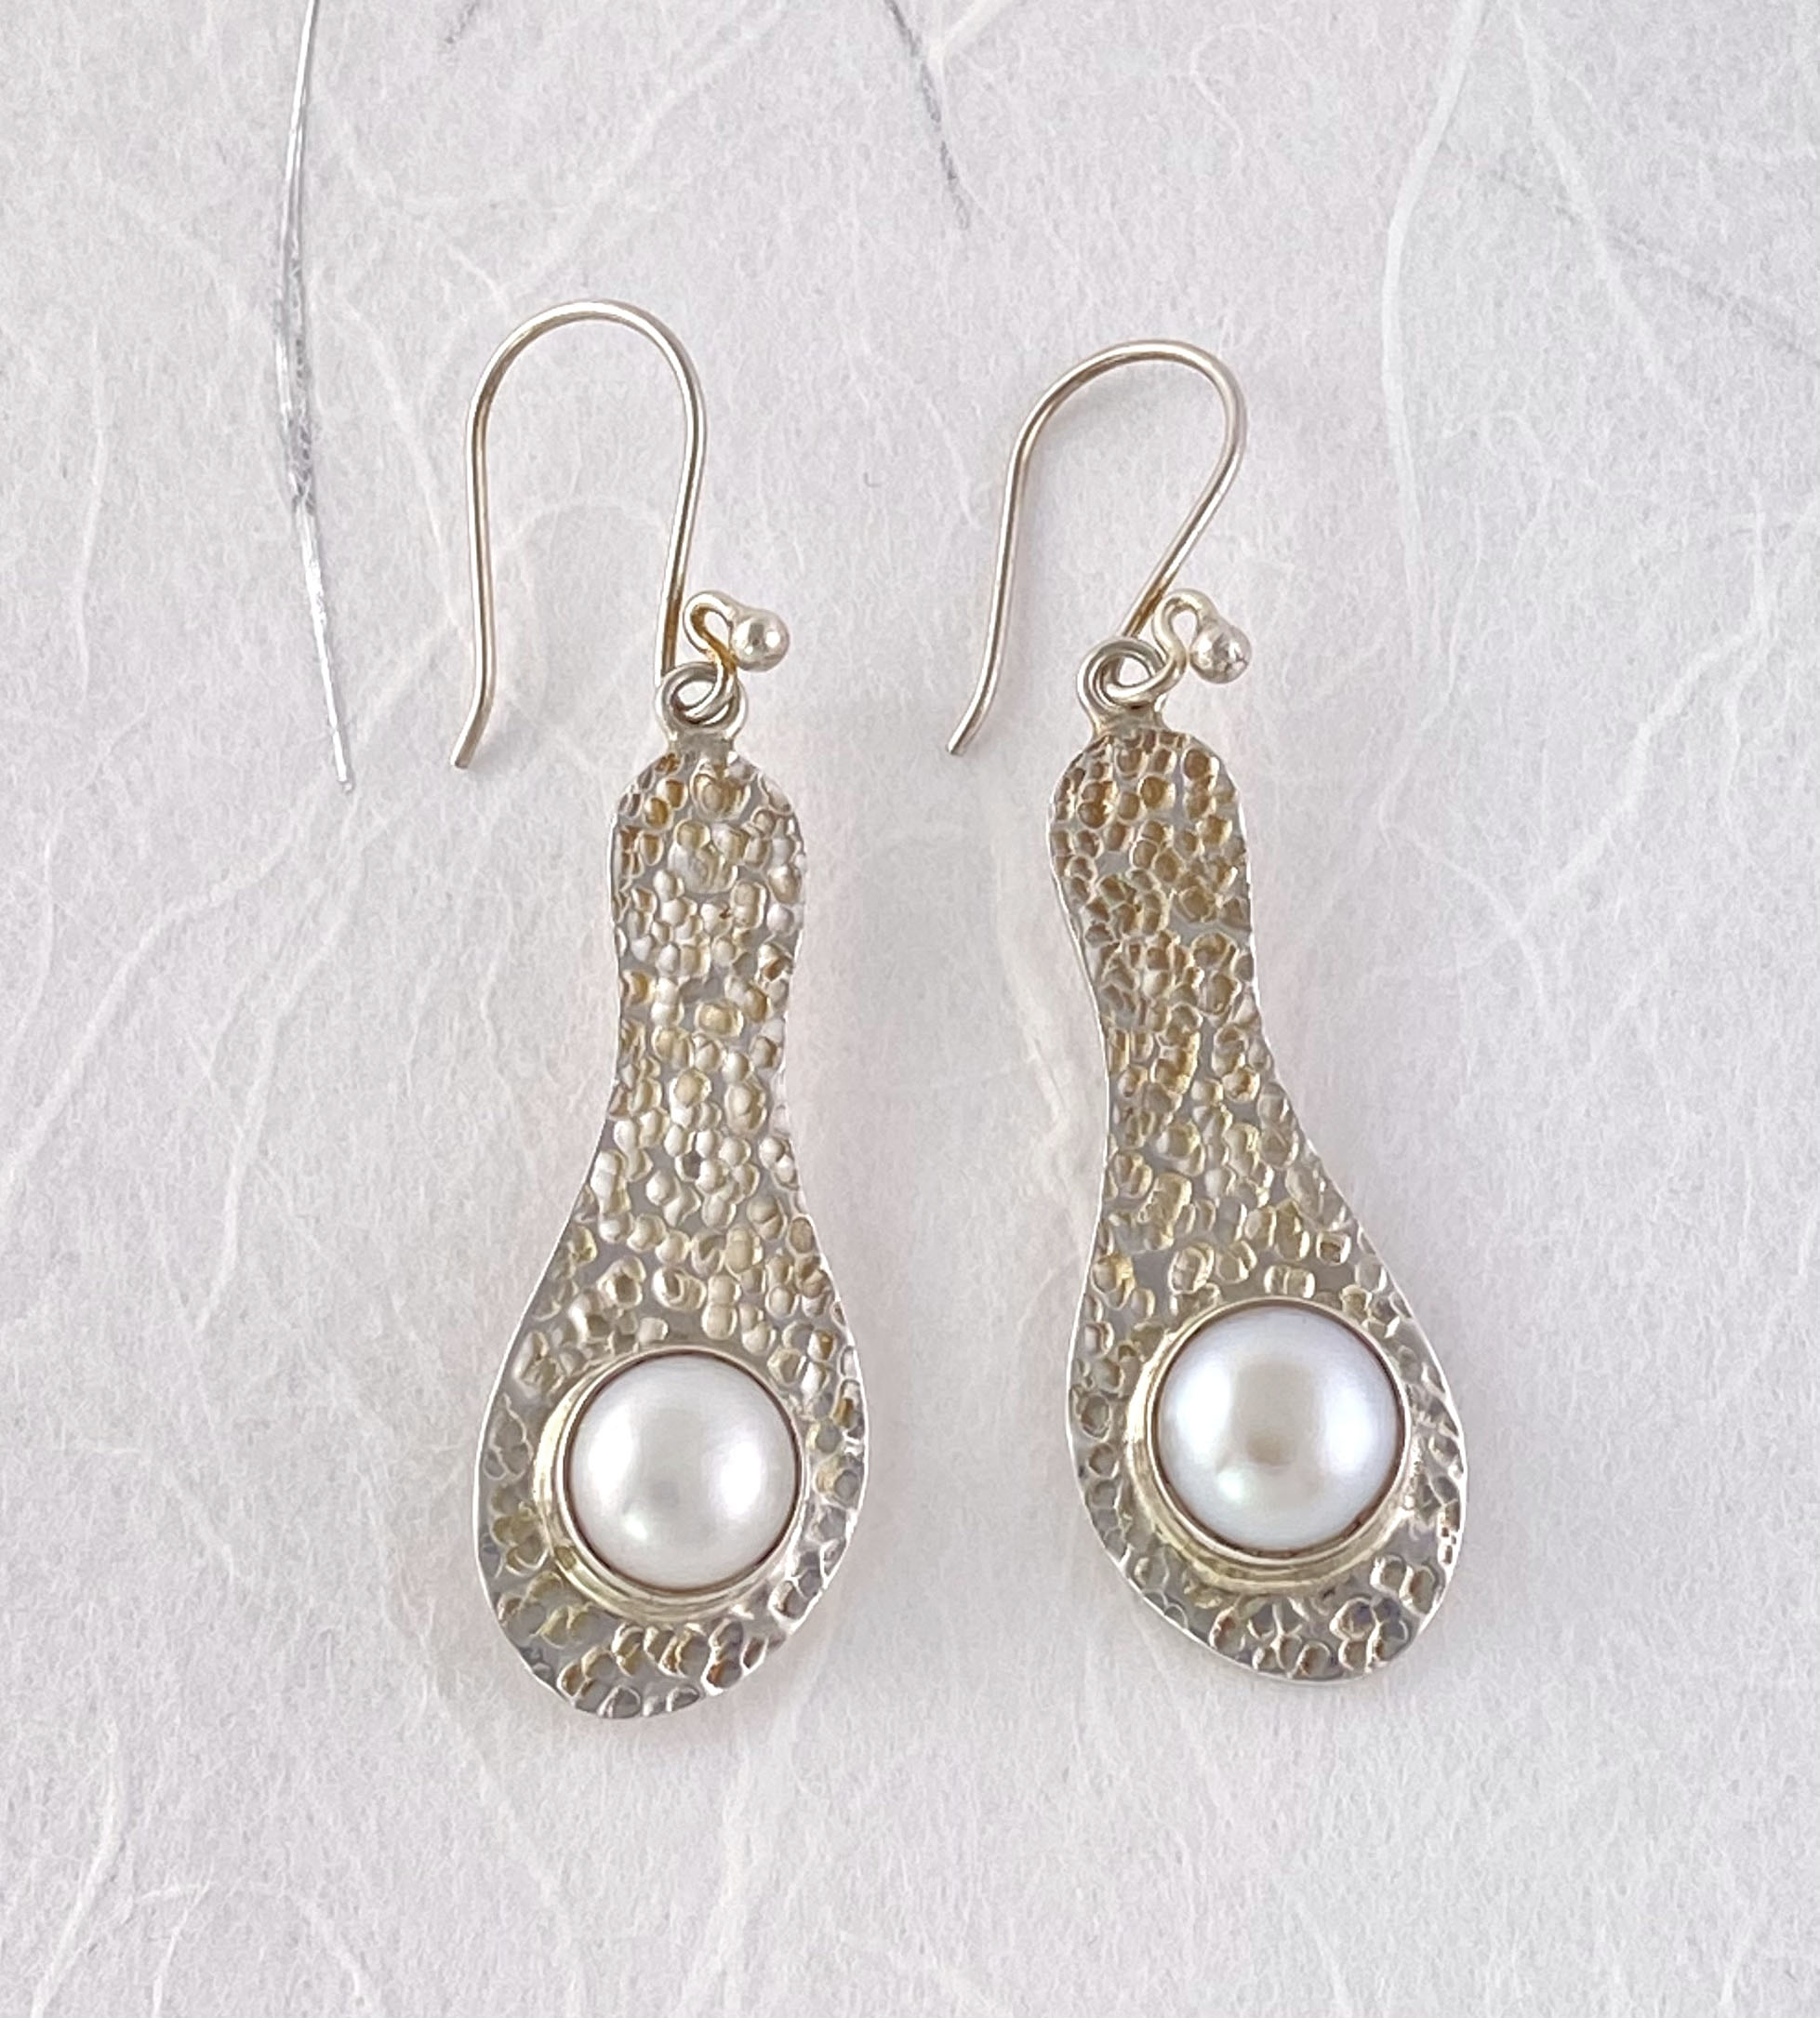 Mabe pearl and hammered sterling silver earrings